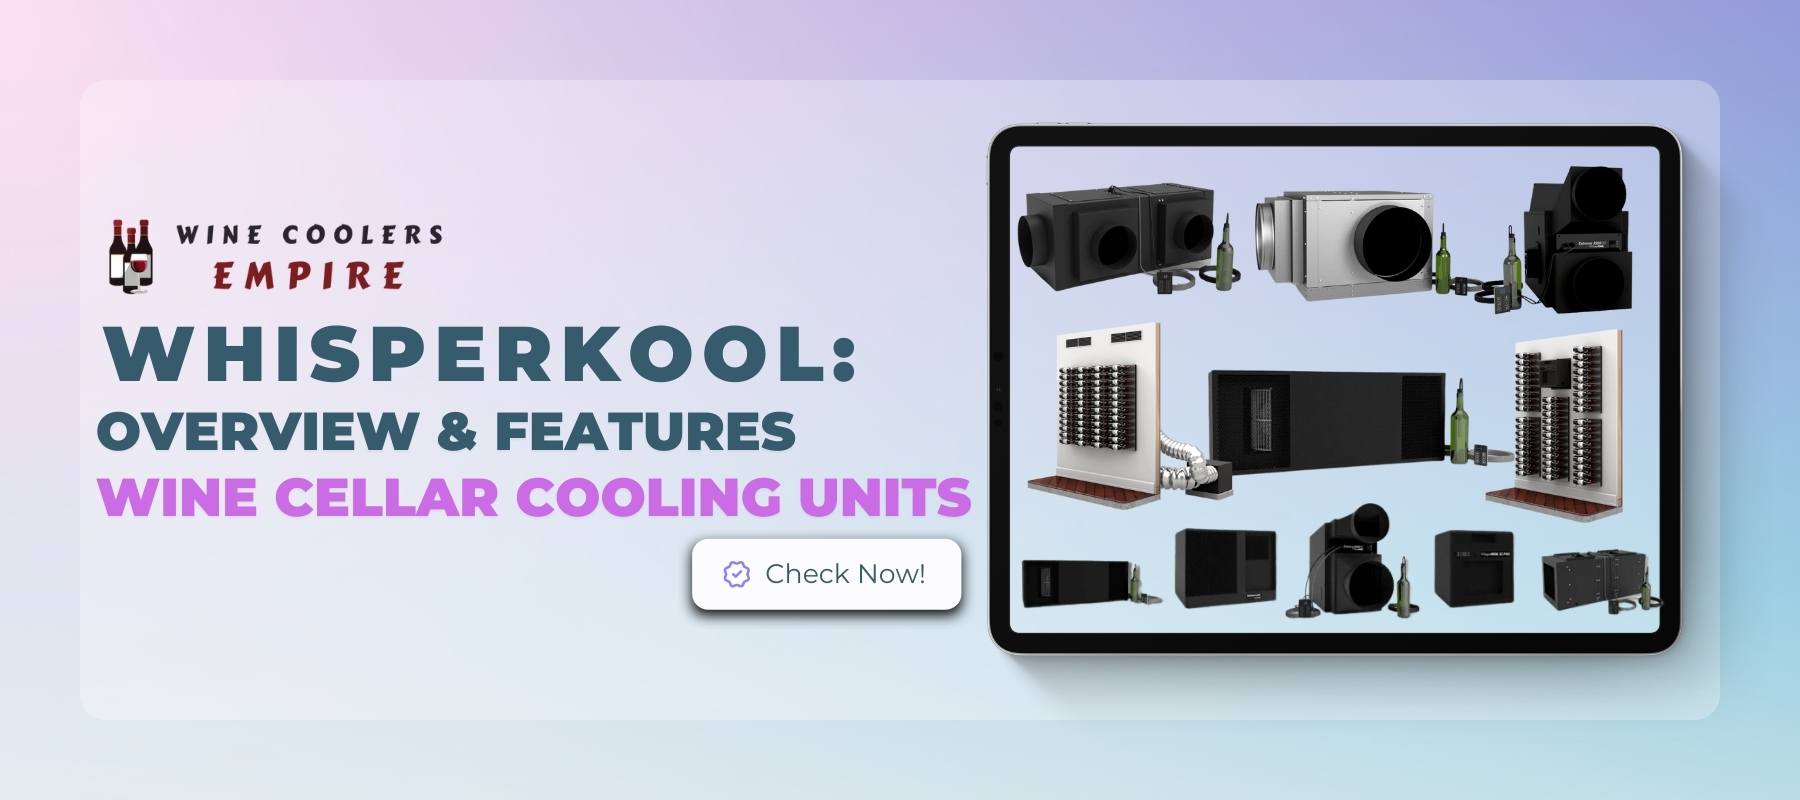 WhisperKOOL: Overview & Features | Wine Cellar Cooling Units